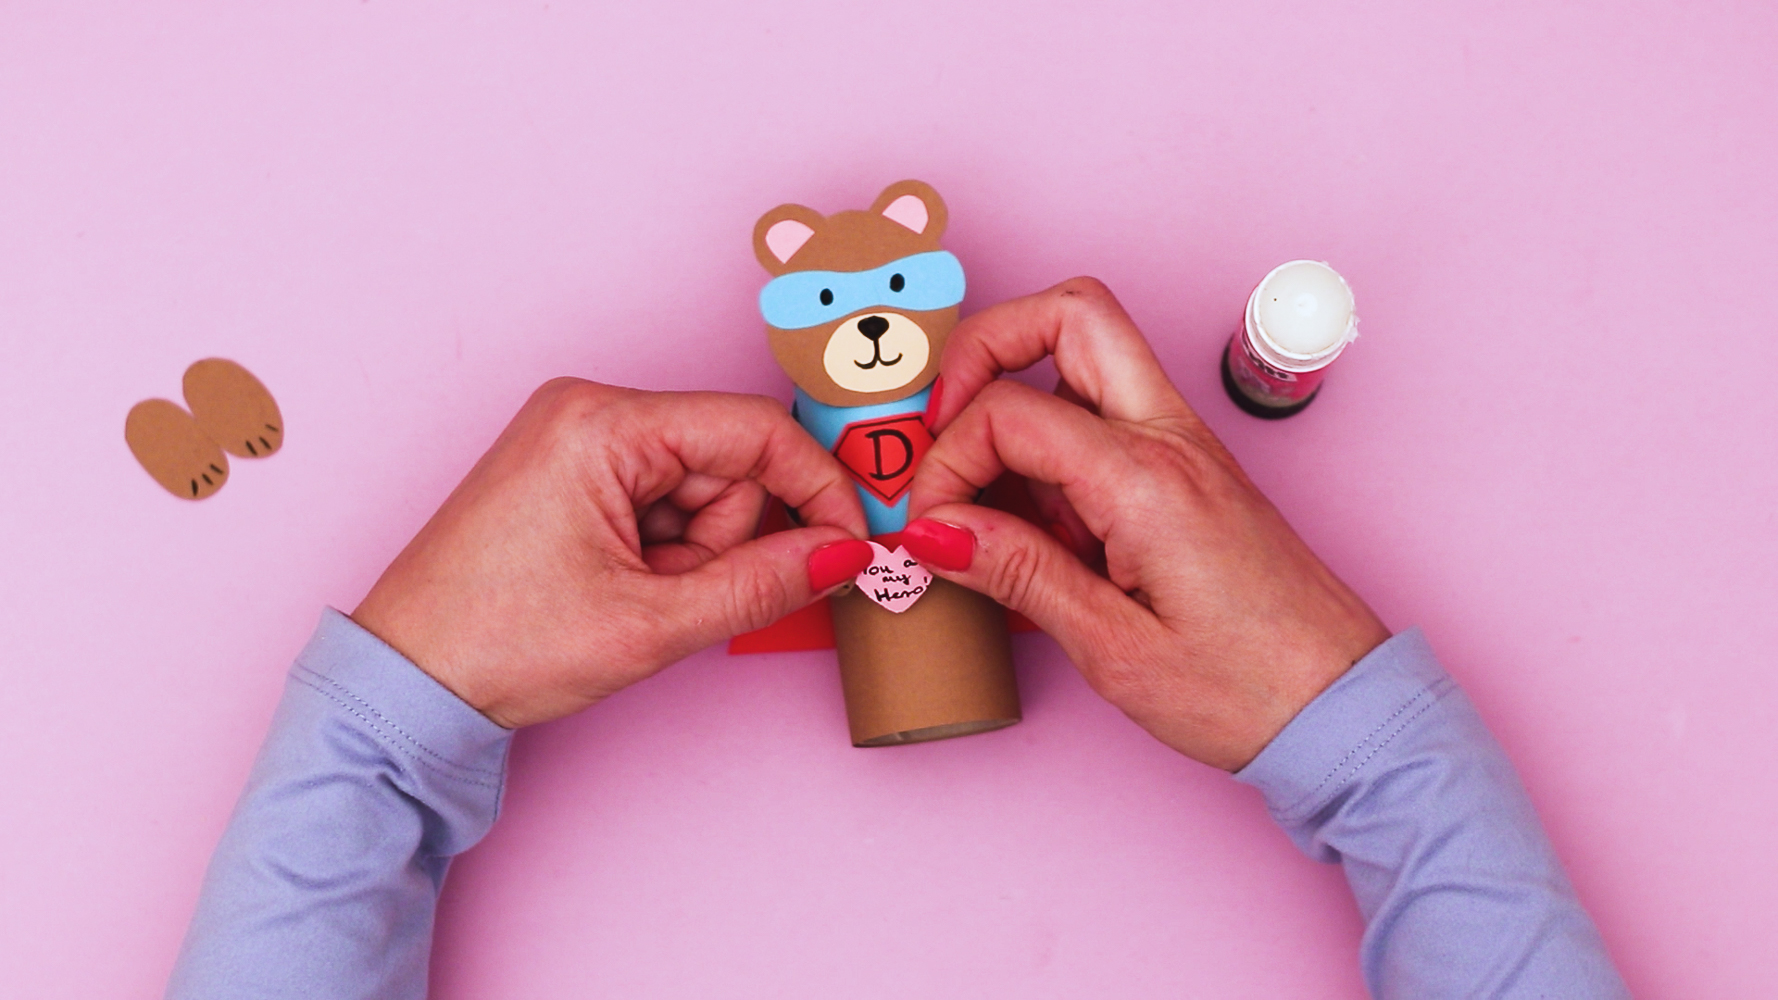 Image featuring a hand glueing a heart with a 'you are my hero' message onto the bear's arms.